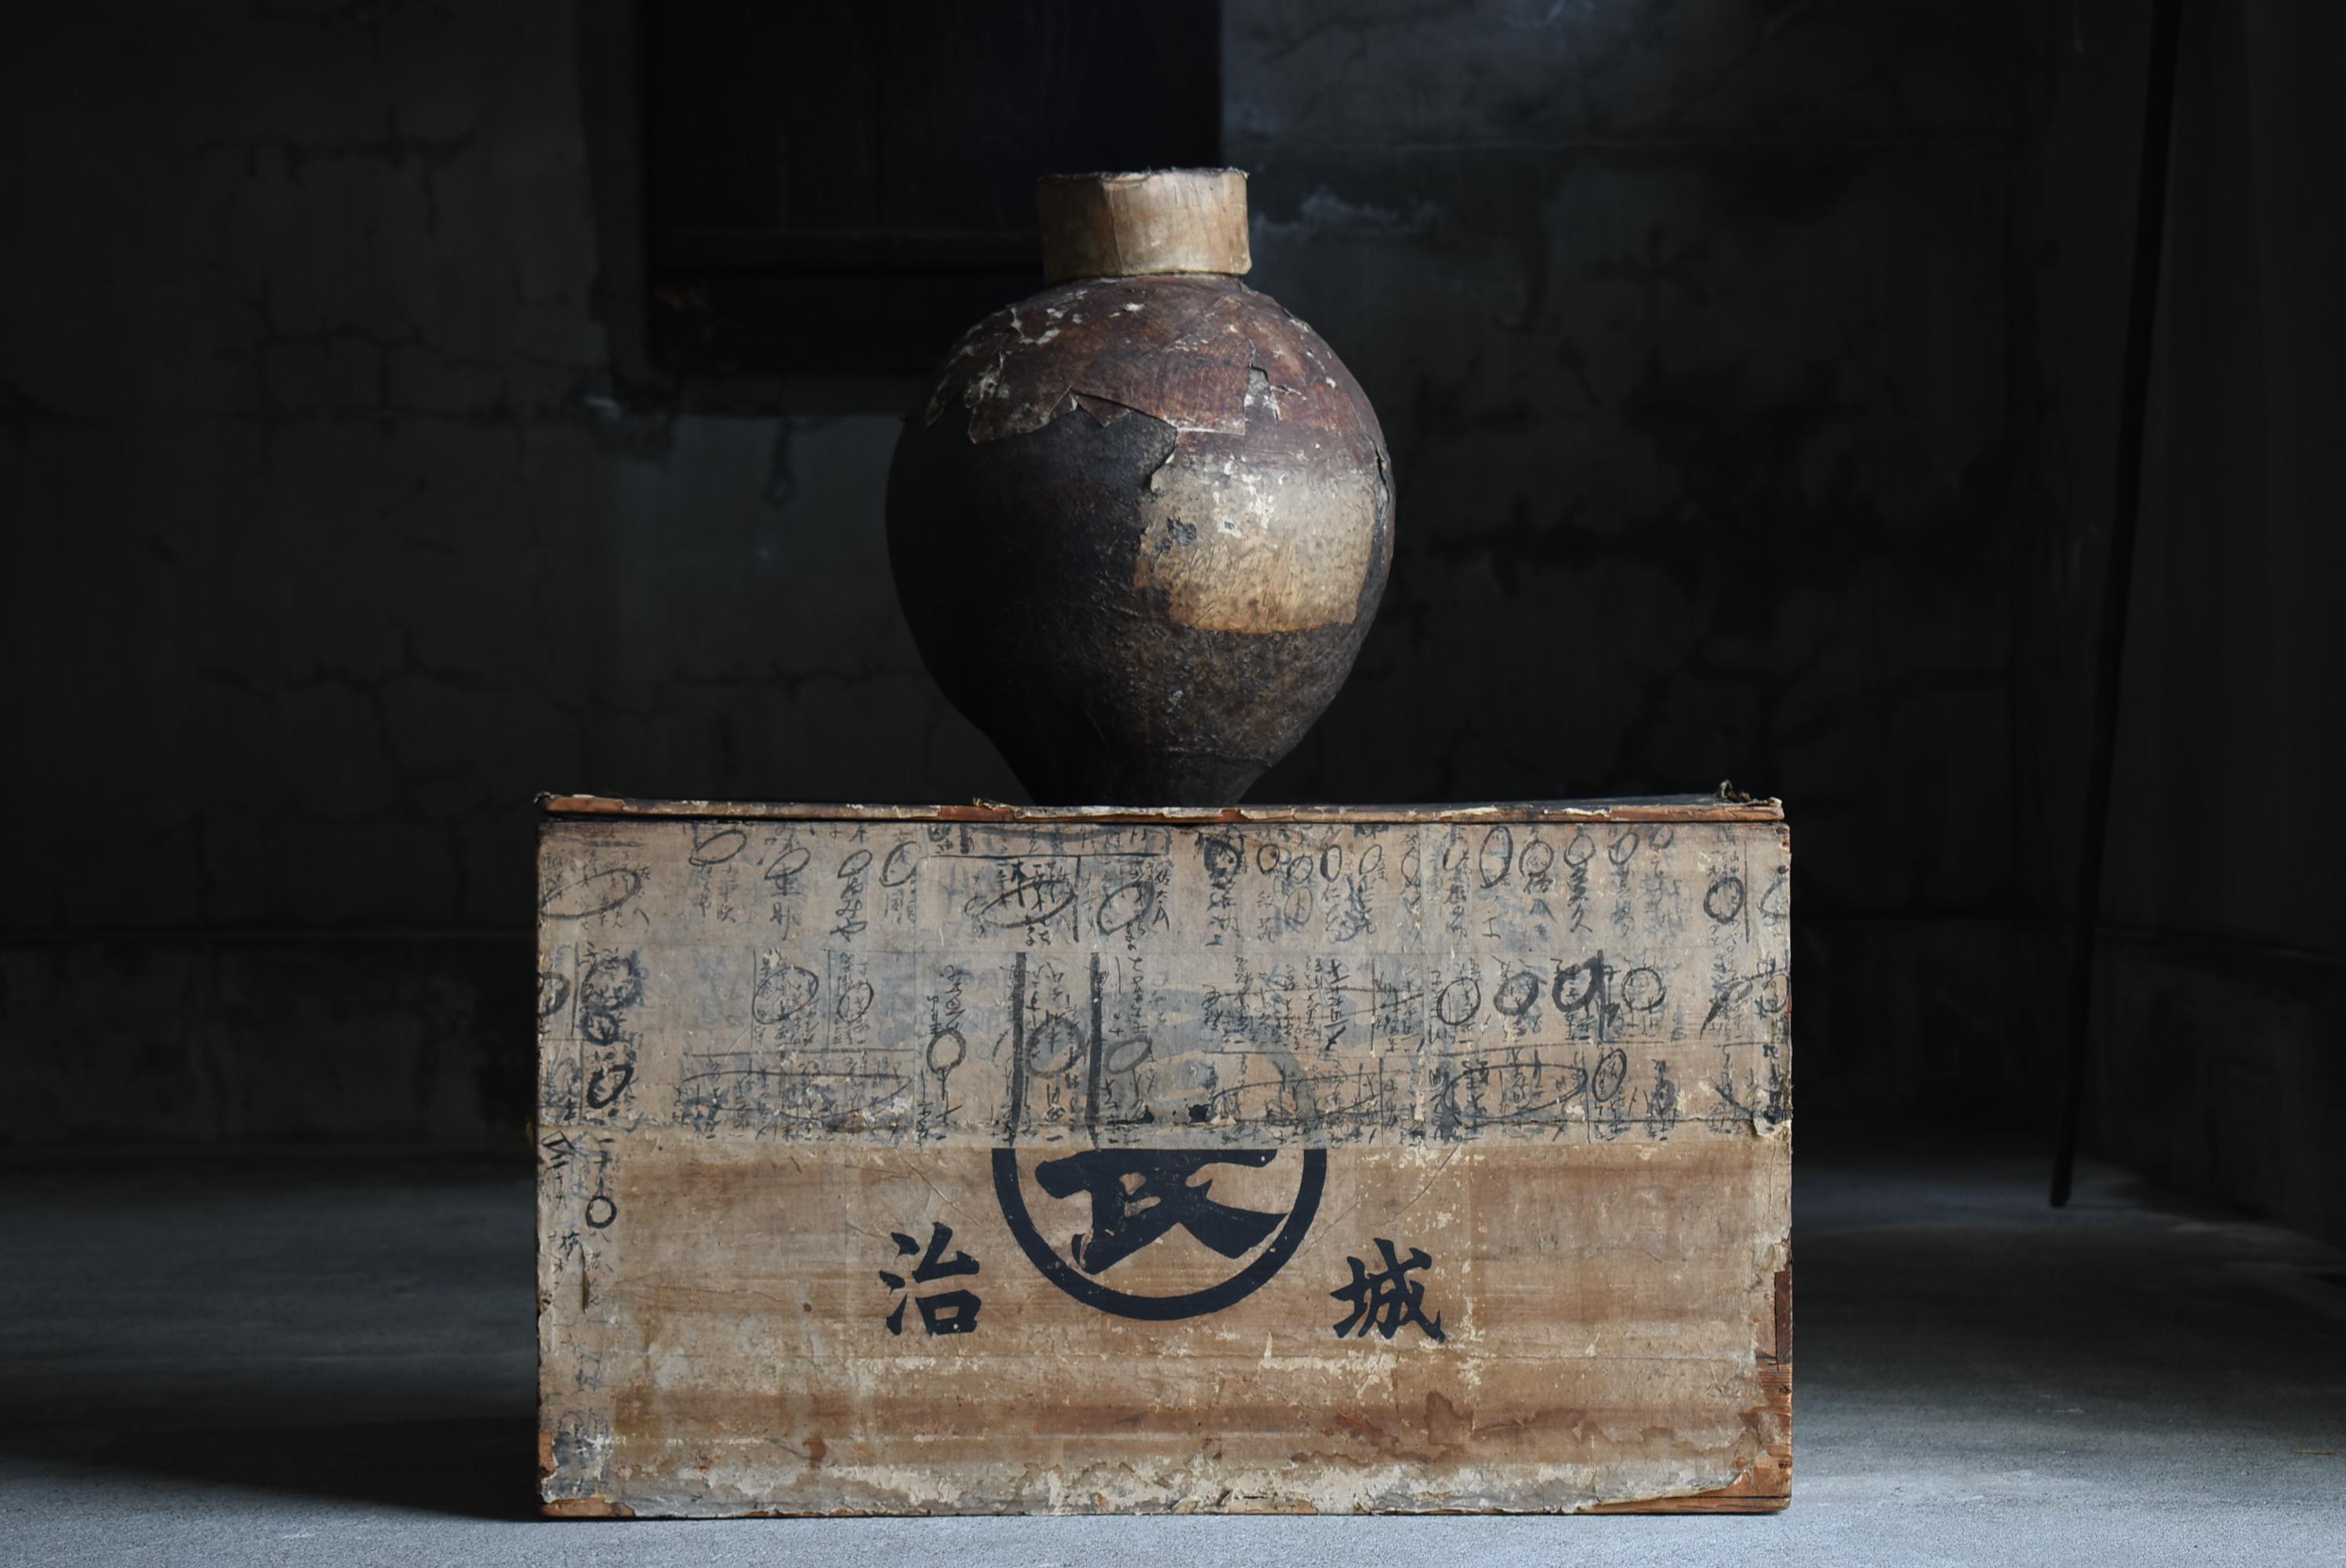 It is an old Japanese wooden box.
It was used to store rice.
It is an item from the Meiji era. (1860s-1920s)

Japan is a humid country.
Therefore, paper was pasted to prevent humidity.
The inside of the box is covered with galvanized